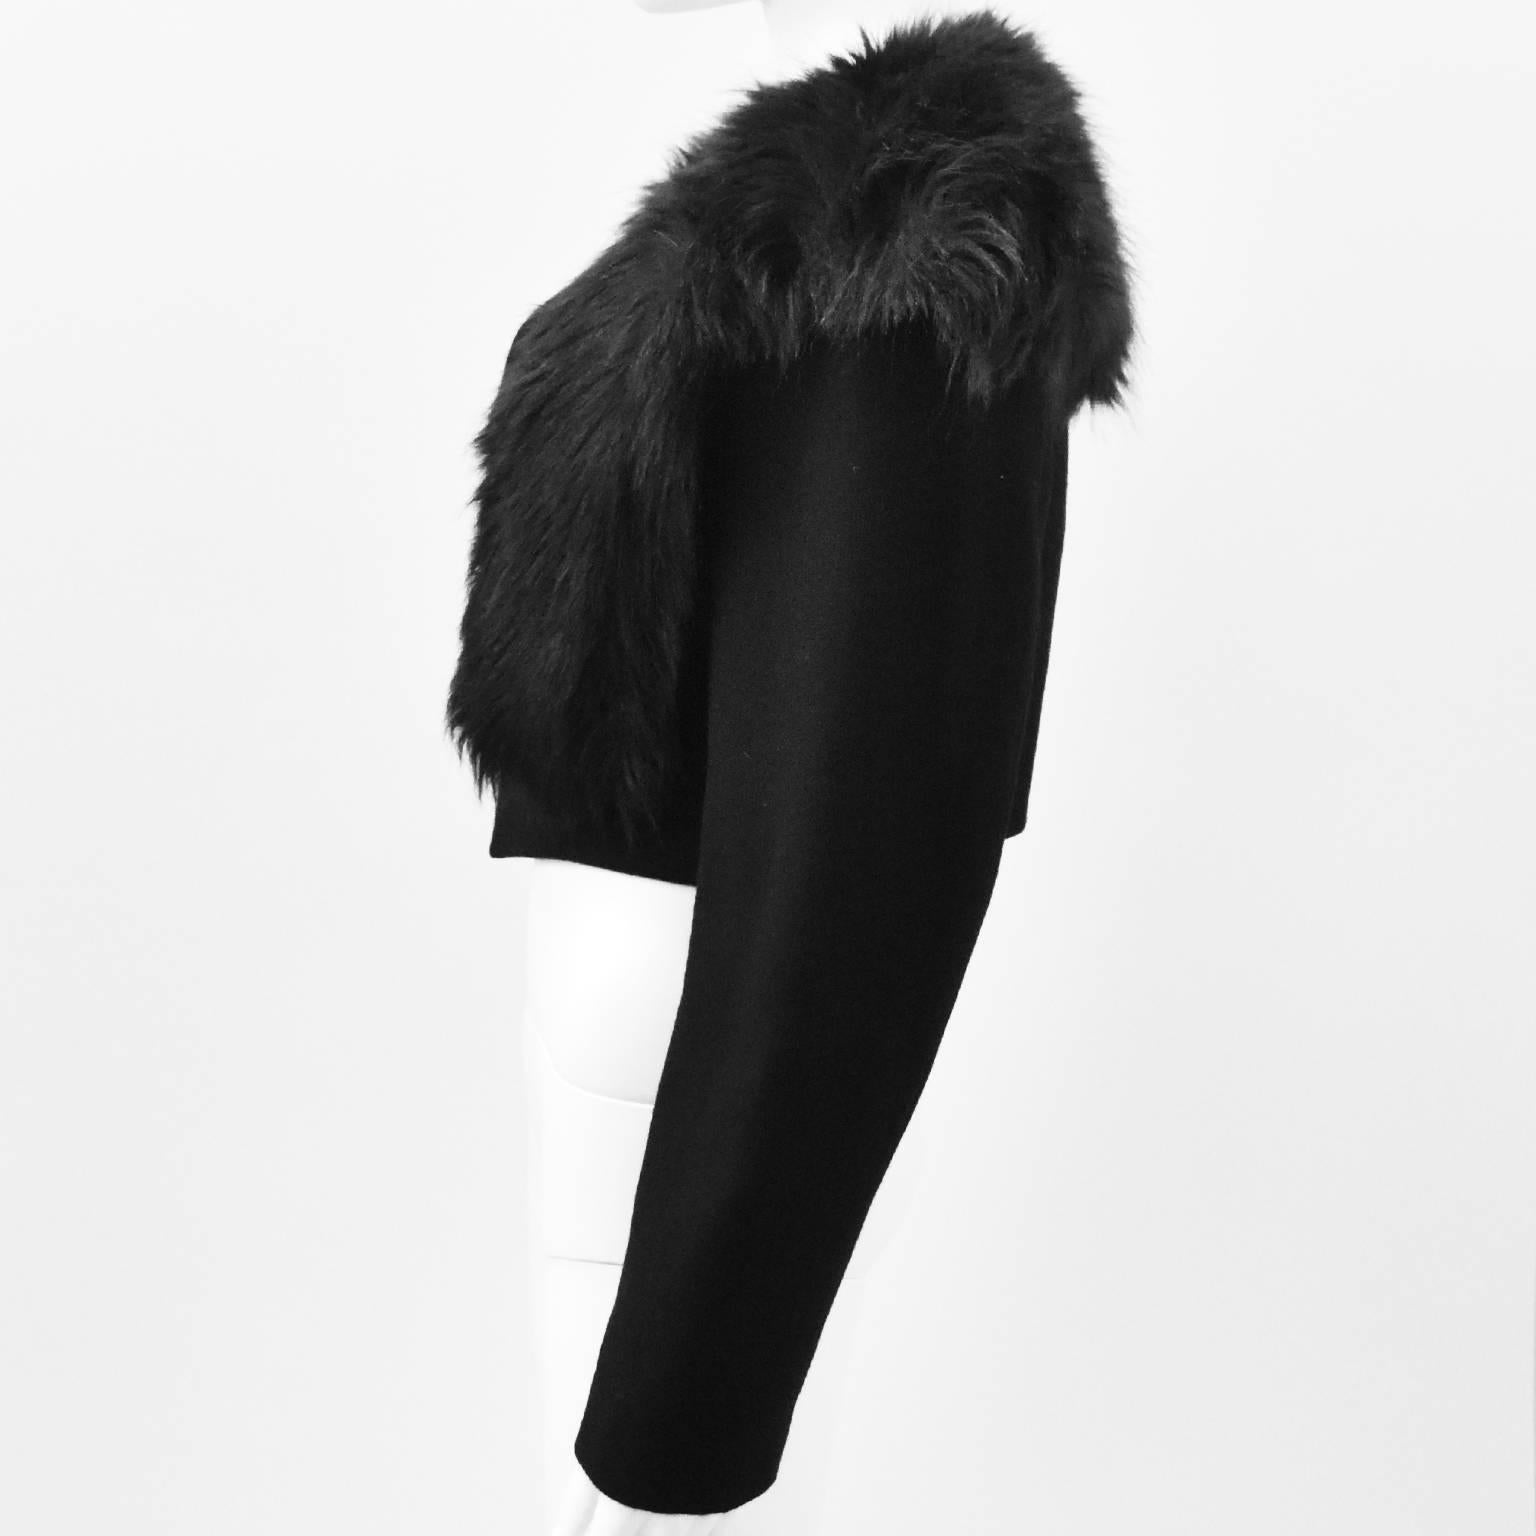 Comme des Garcons Black Cropped Jacket with Faux Fur Collar Details  In Excellent Condition For Sale In London, GB